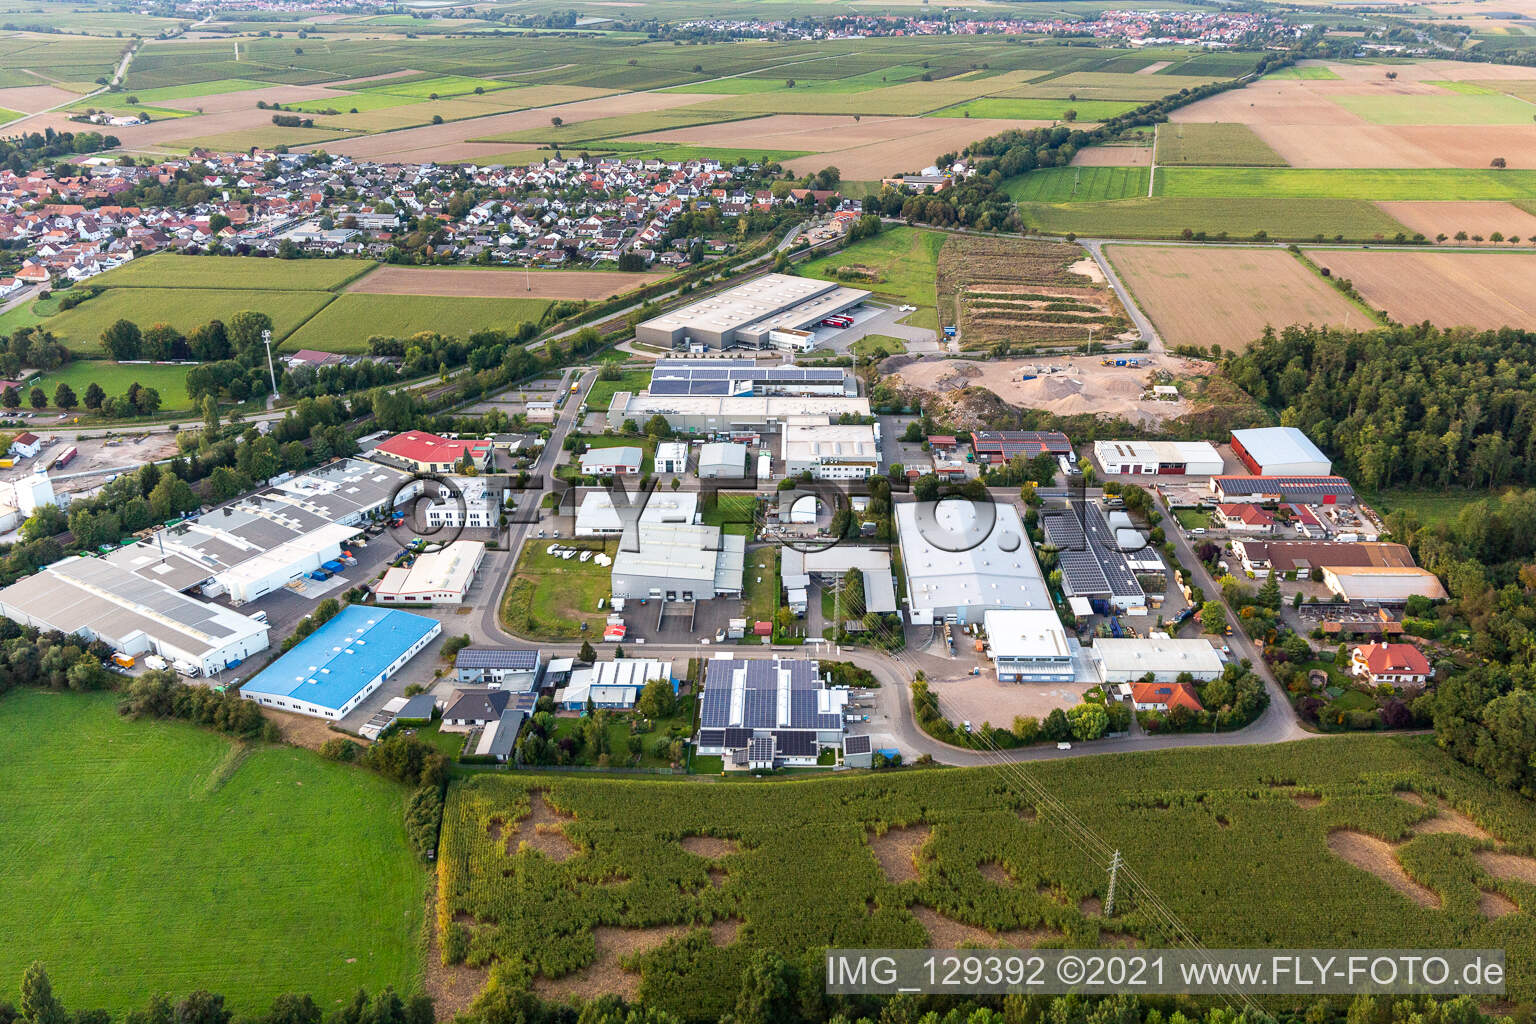 Oblique view of Große Ahlmühle industrial area in Rohrbach in the state Rhineland-Palatinate, Germany